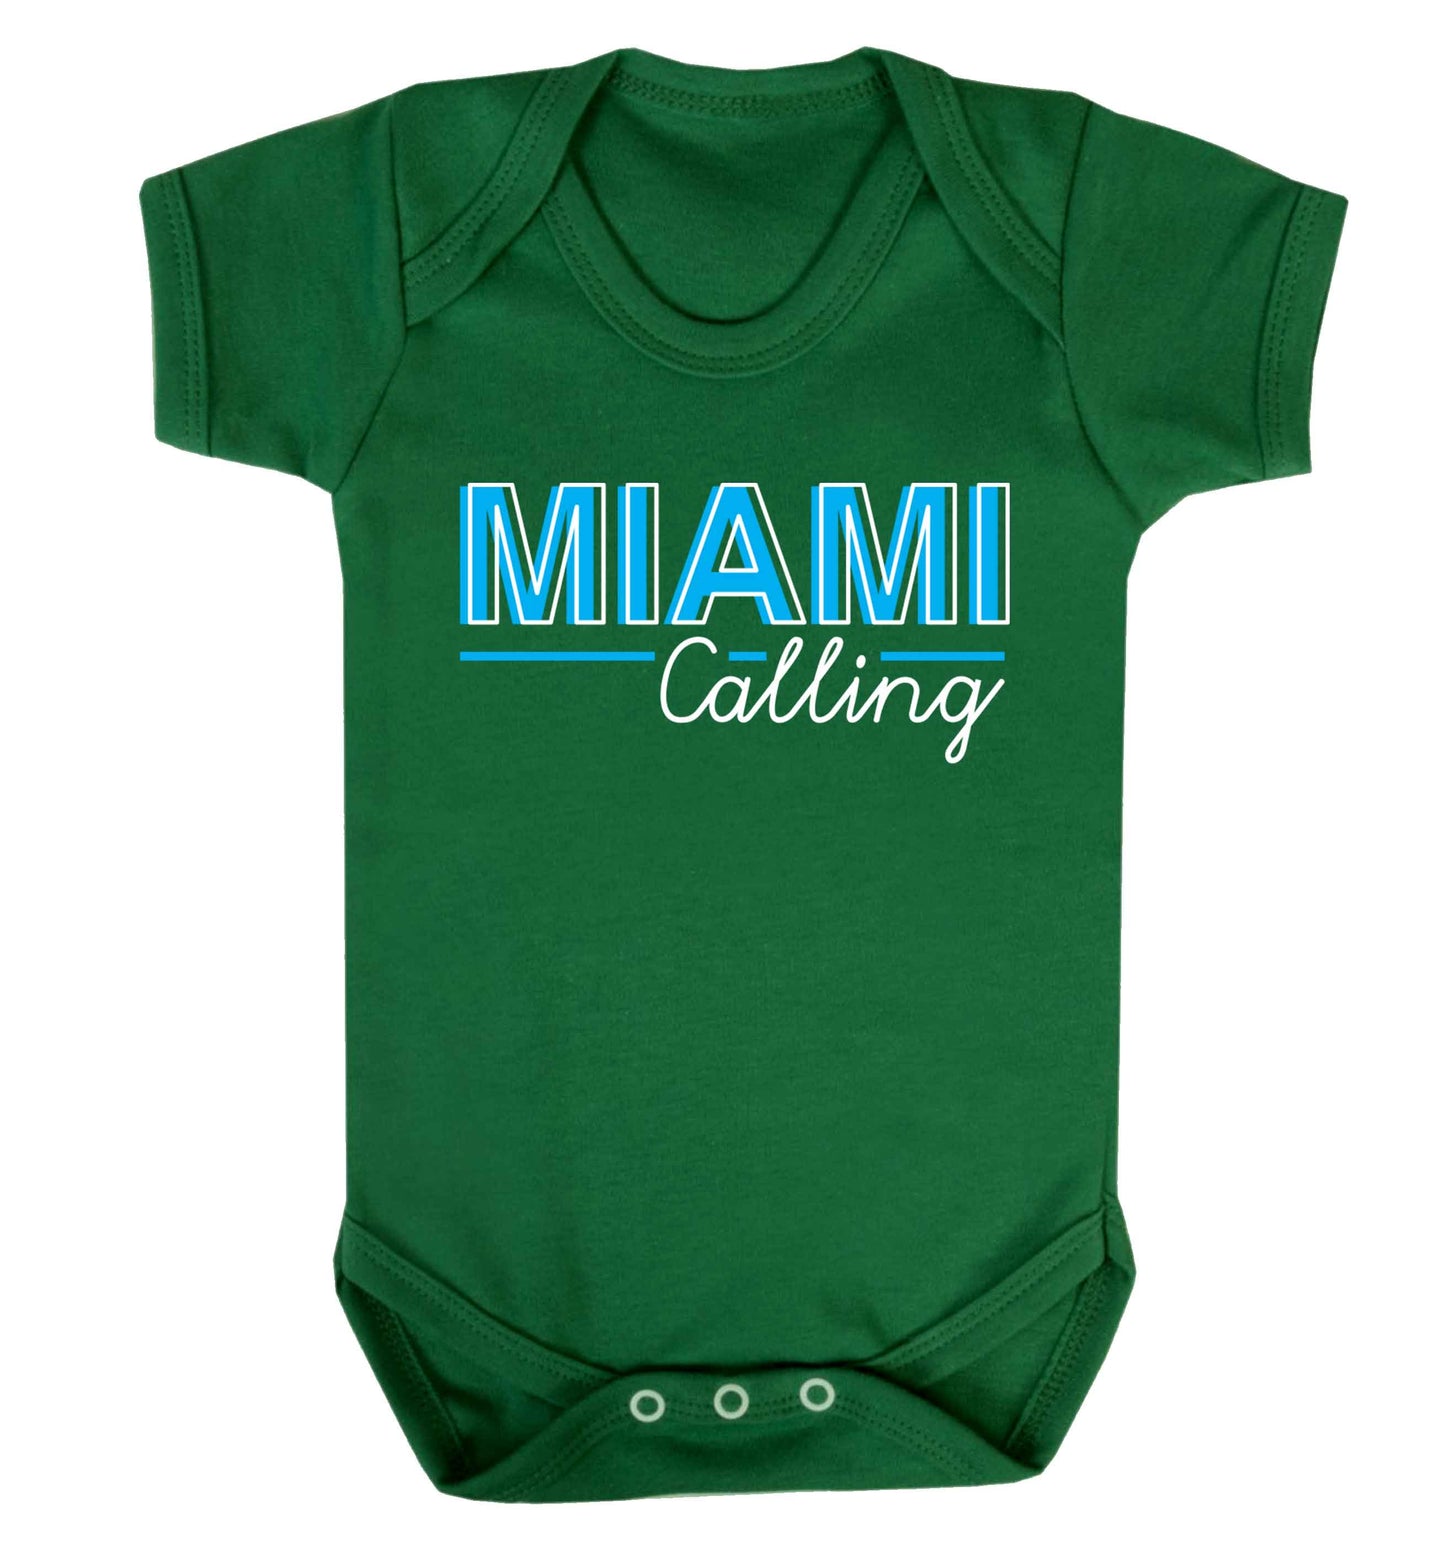 Miami calling Baby Vest green 18-24 months